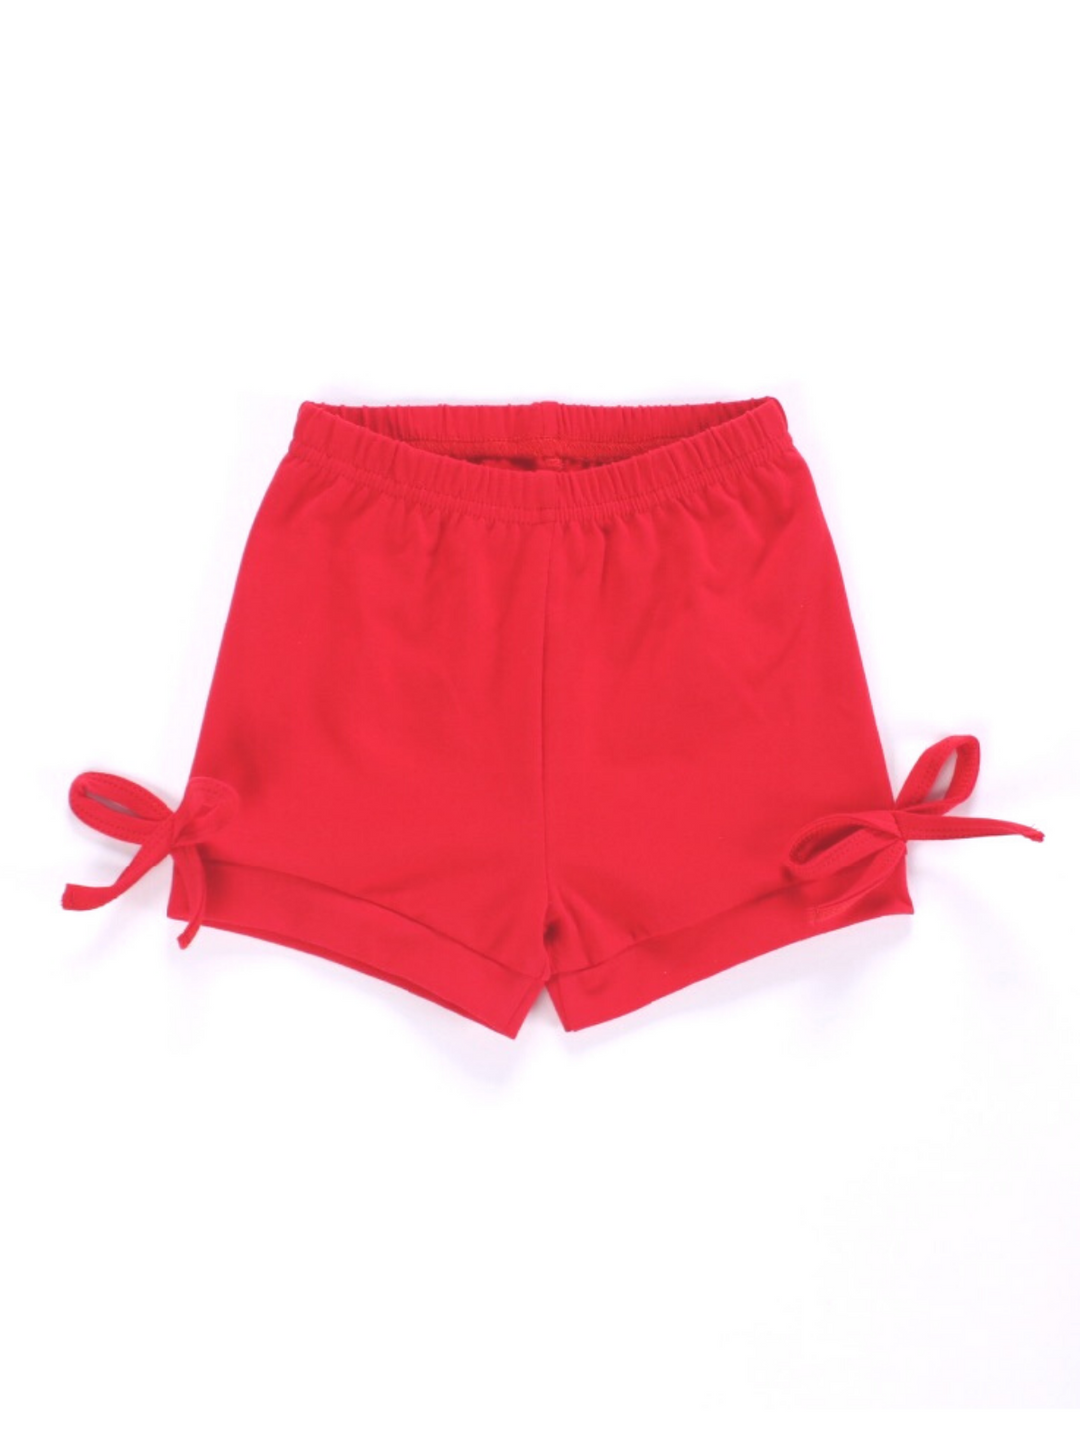 Classic Red Shorties